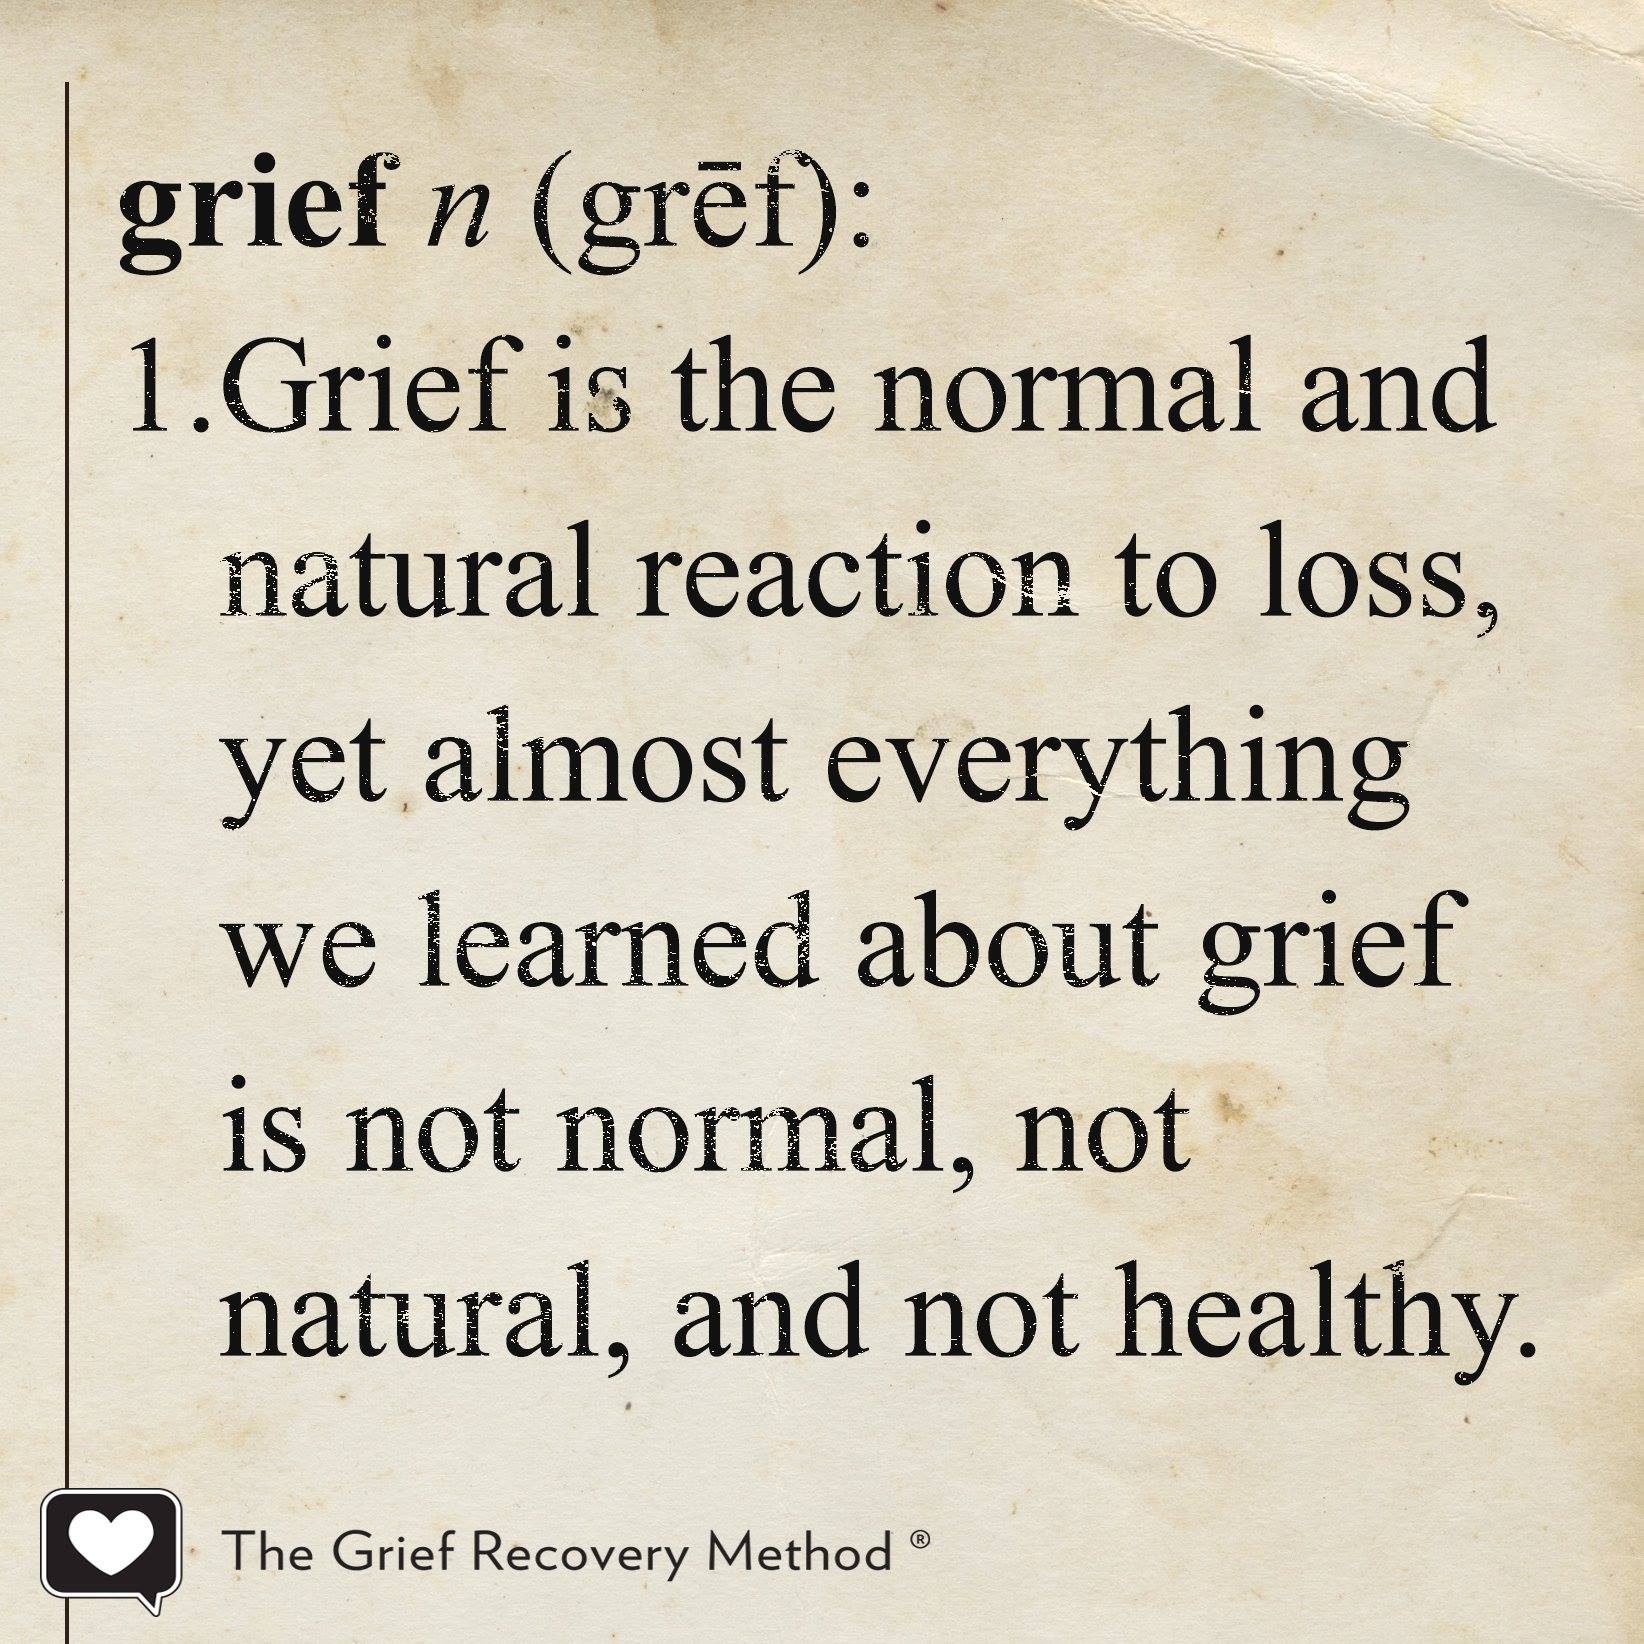  definition of grief normal and natural reaction to loss